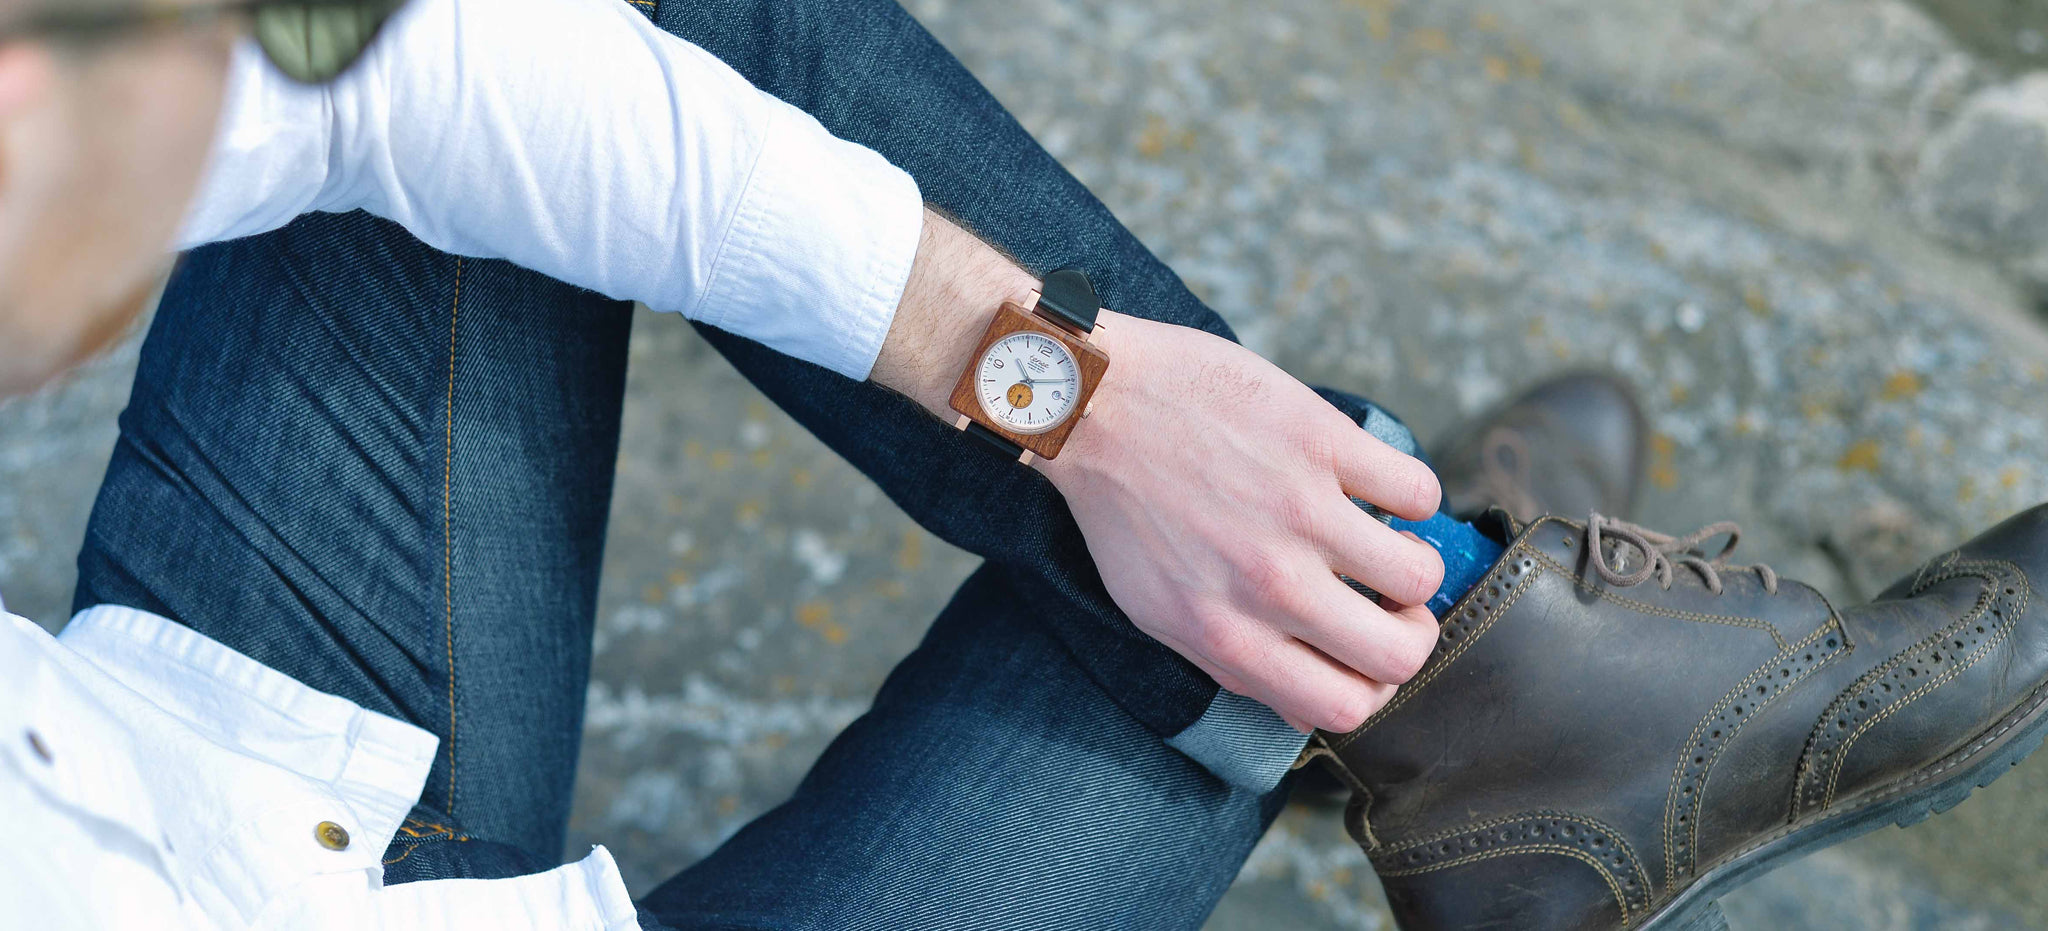 Tense Square Wood Watches - The Vermont Leather Watch